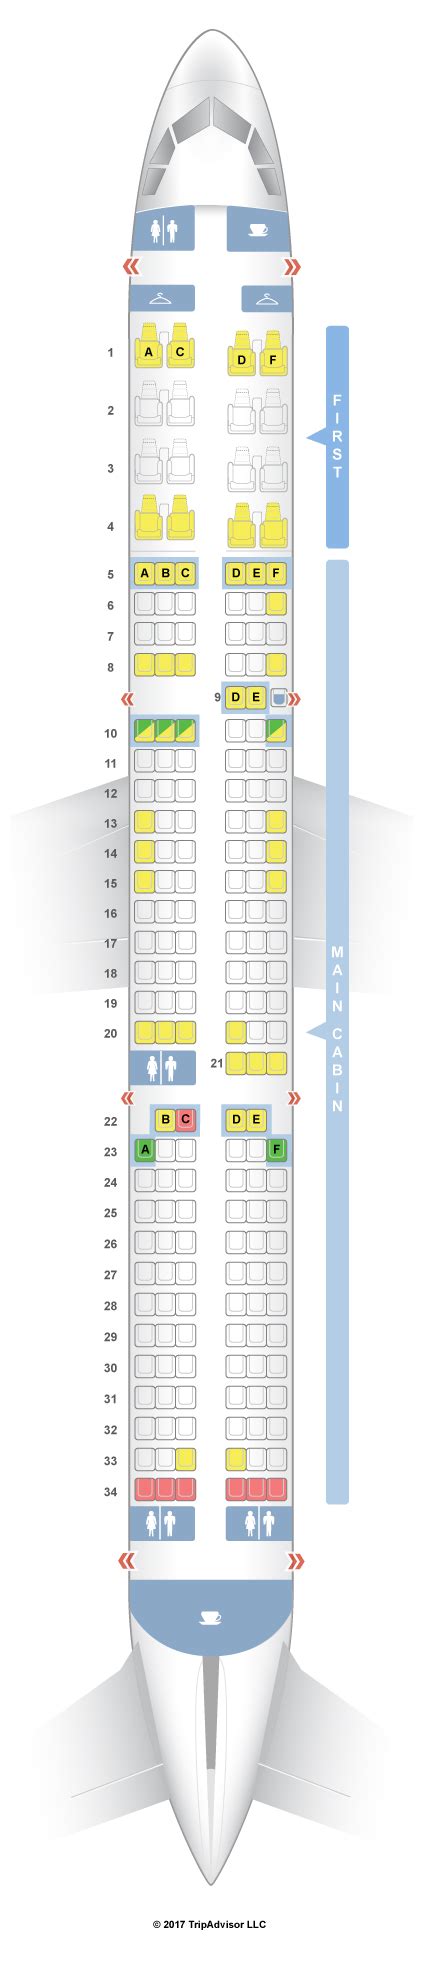 American Airlines Seating Chart A